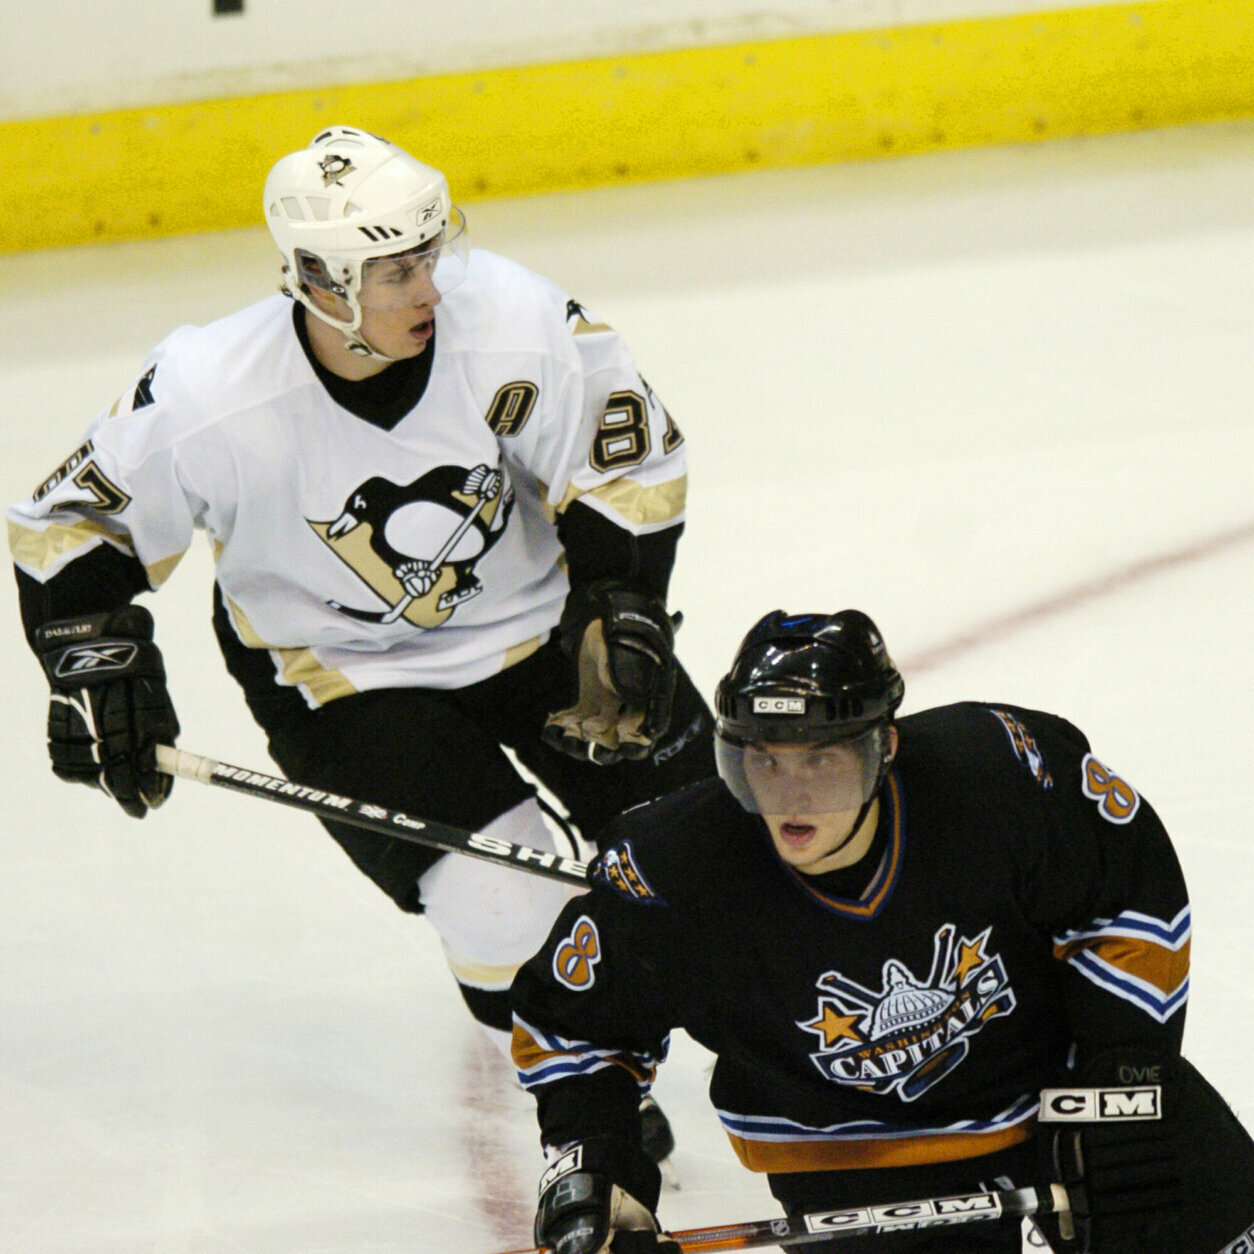 <p>Alex Ovechkin and the Penguins&#8217; Sidney Crosby skate in February 2006. The two rising stars would become the marquee names associated with the Washington-Pittsburgh rivalry.</p>
